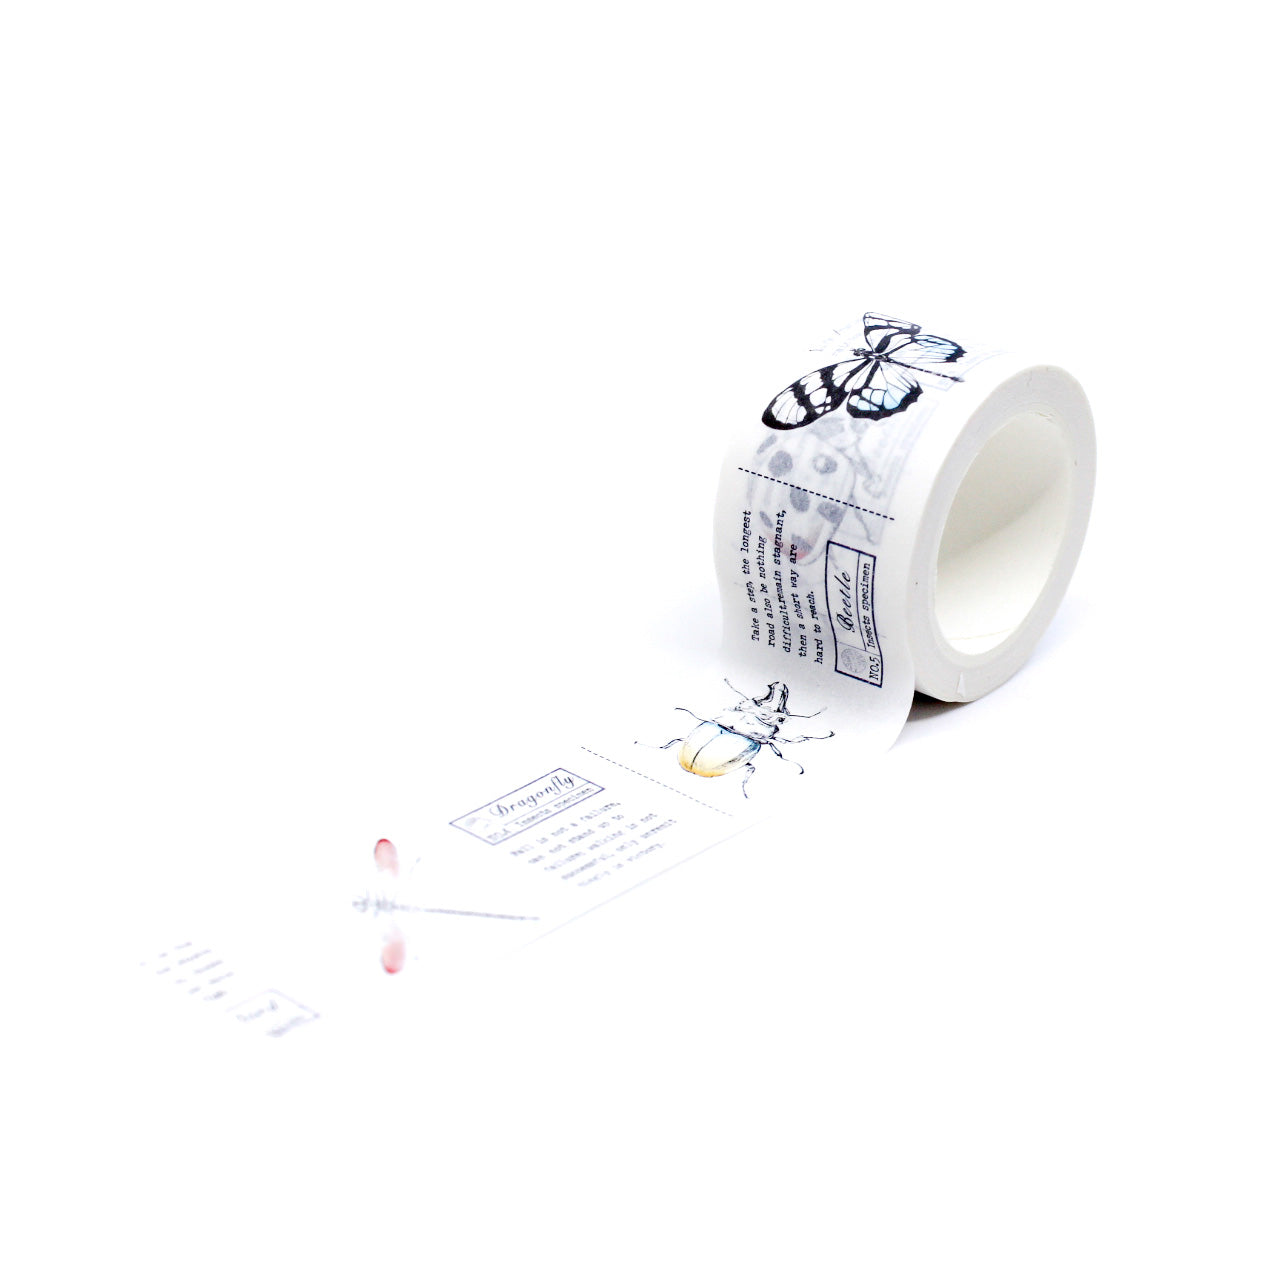 Entomologist and Zoology Insects Science Washi Tape, showcasing meticulously illustrated insects and scientific details, perfect for enthusiasts and science-themed crafting. This tape is sold at BBB Supplies Craft Shop.